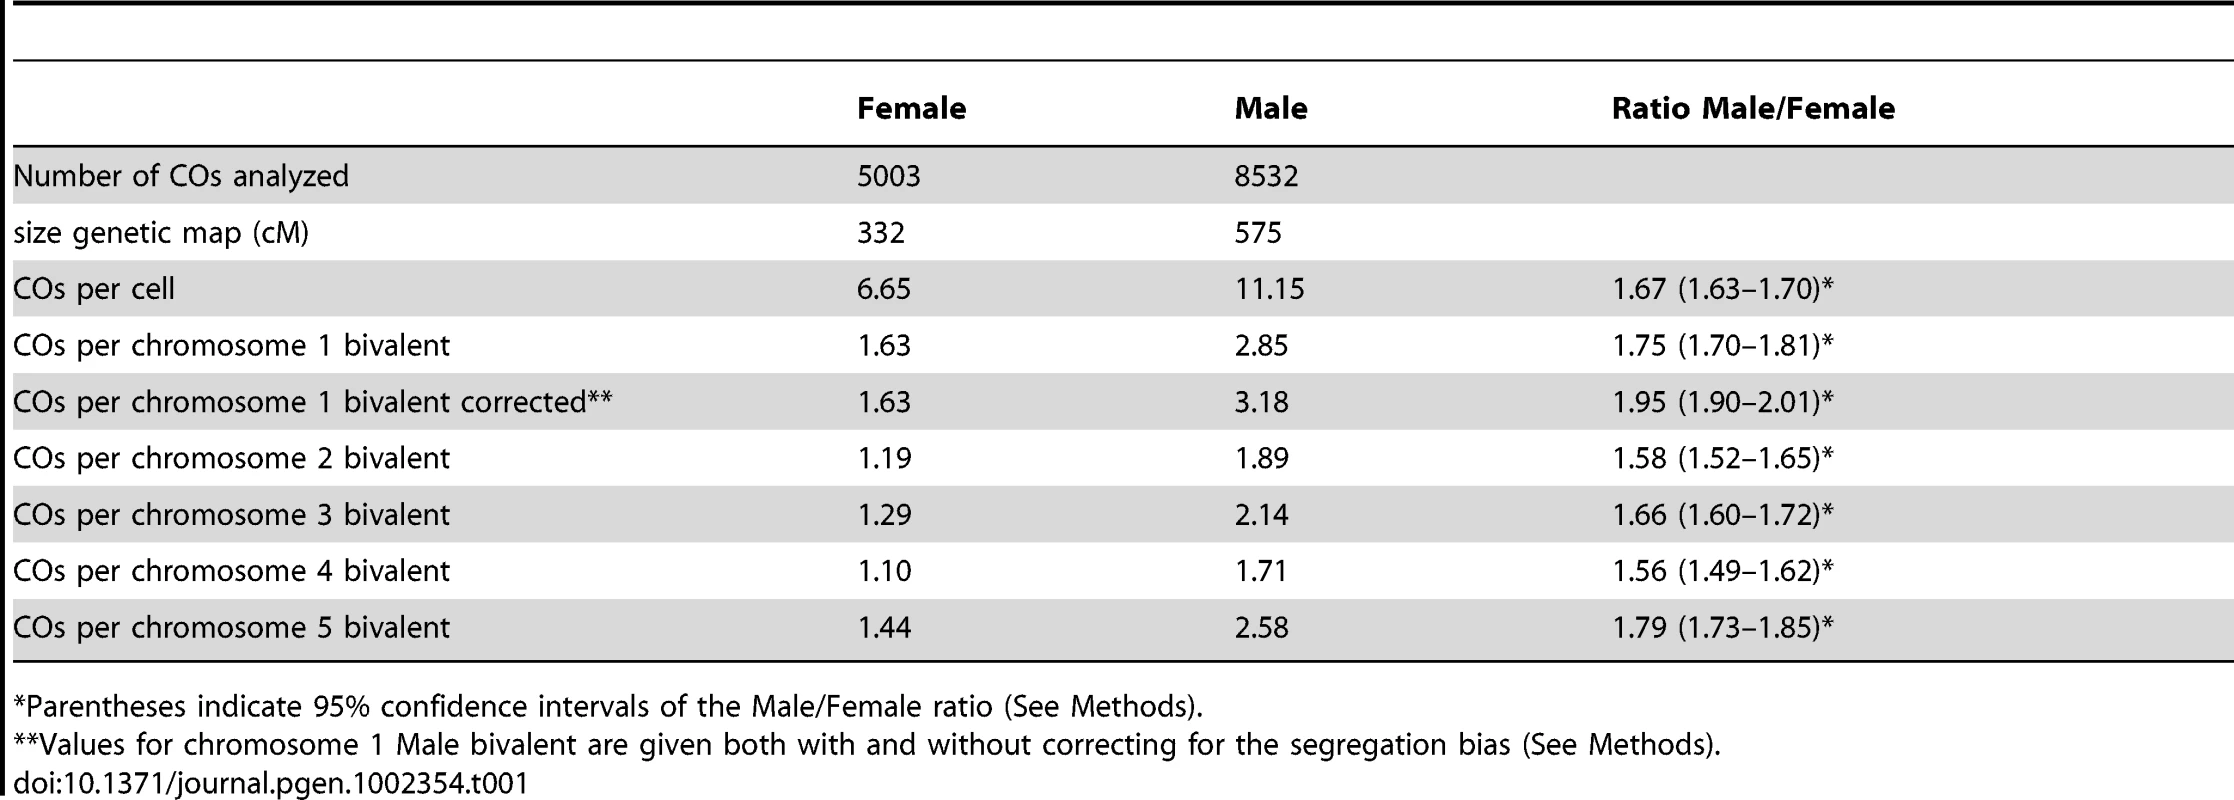 Comparison between male and female population.